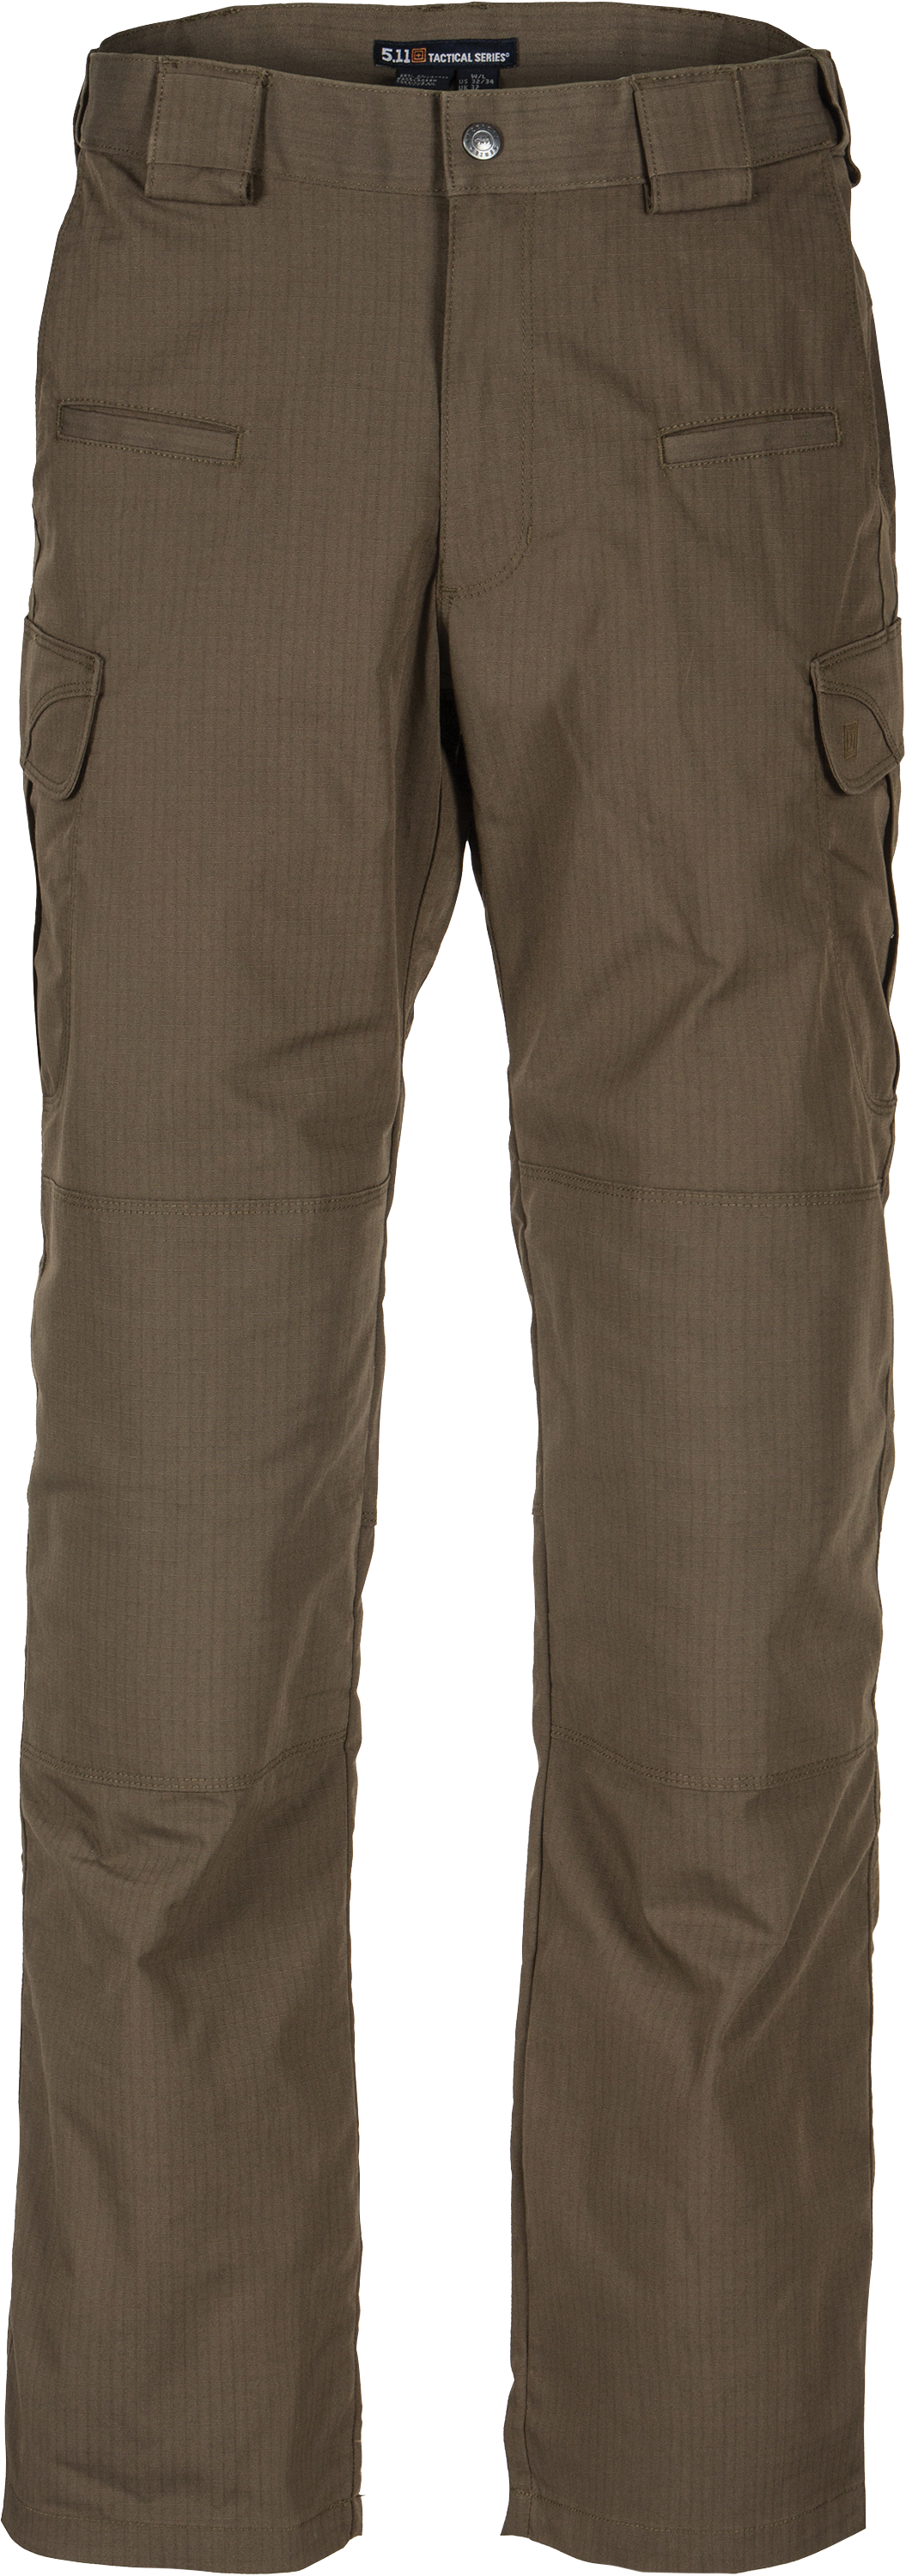 5.11 Tactical Stryke Pants with Flex-Tac for Men